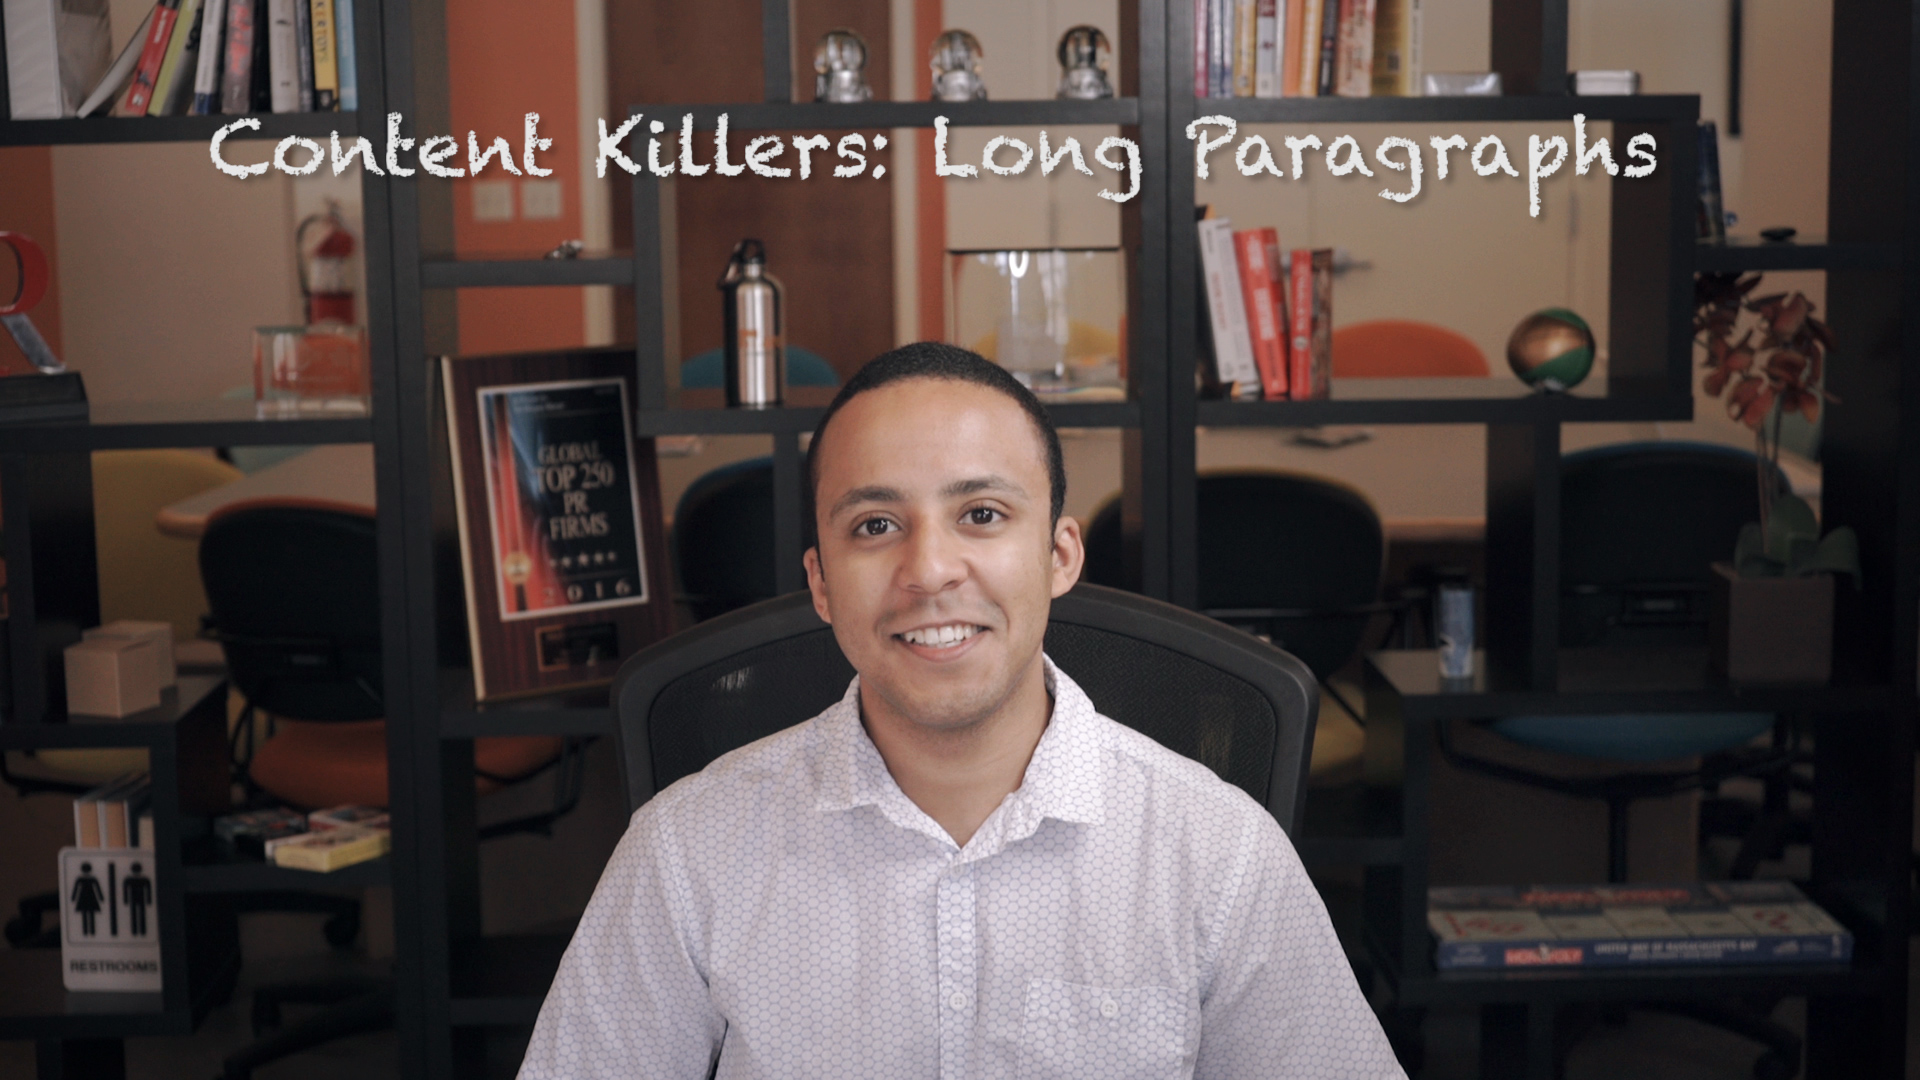 [Video] Why Long Paragraphs Could Ruin Your Writing